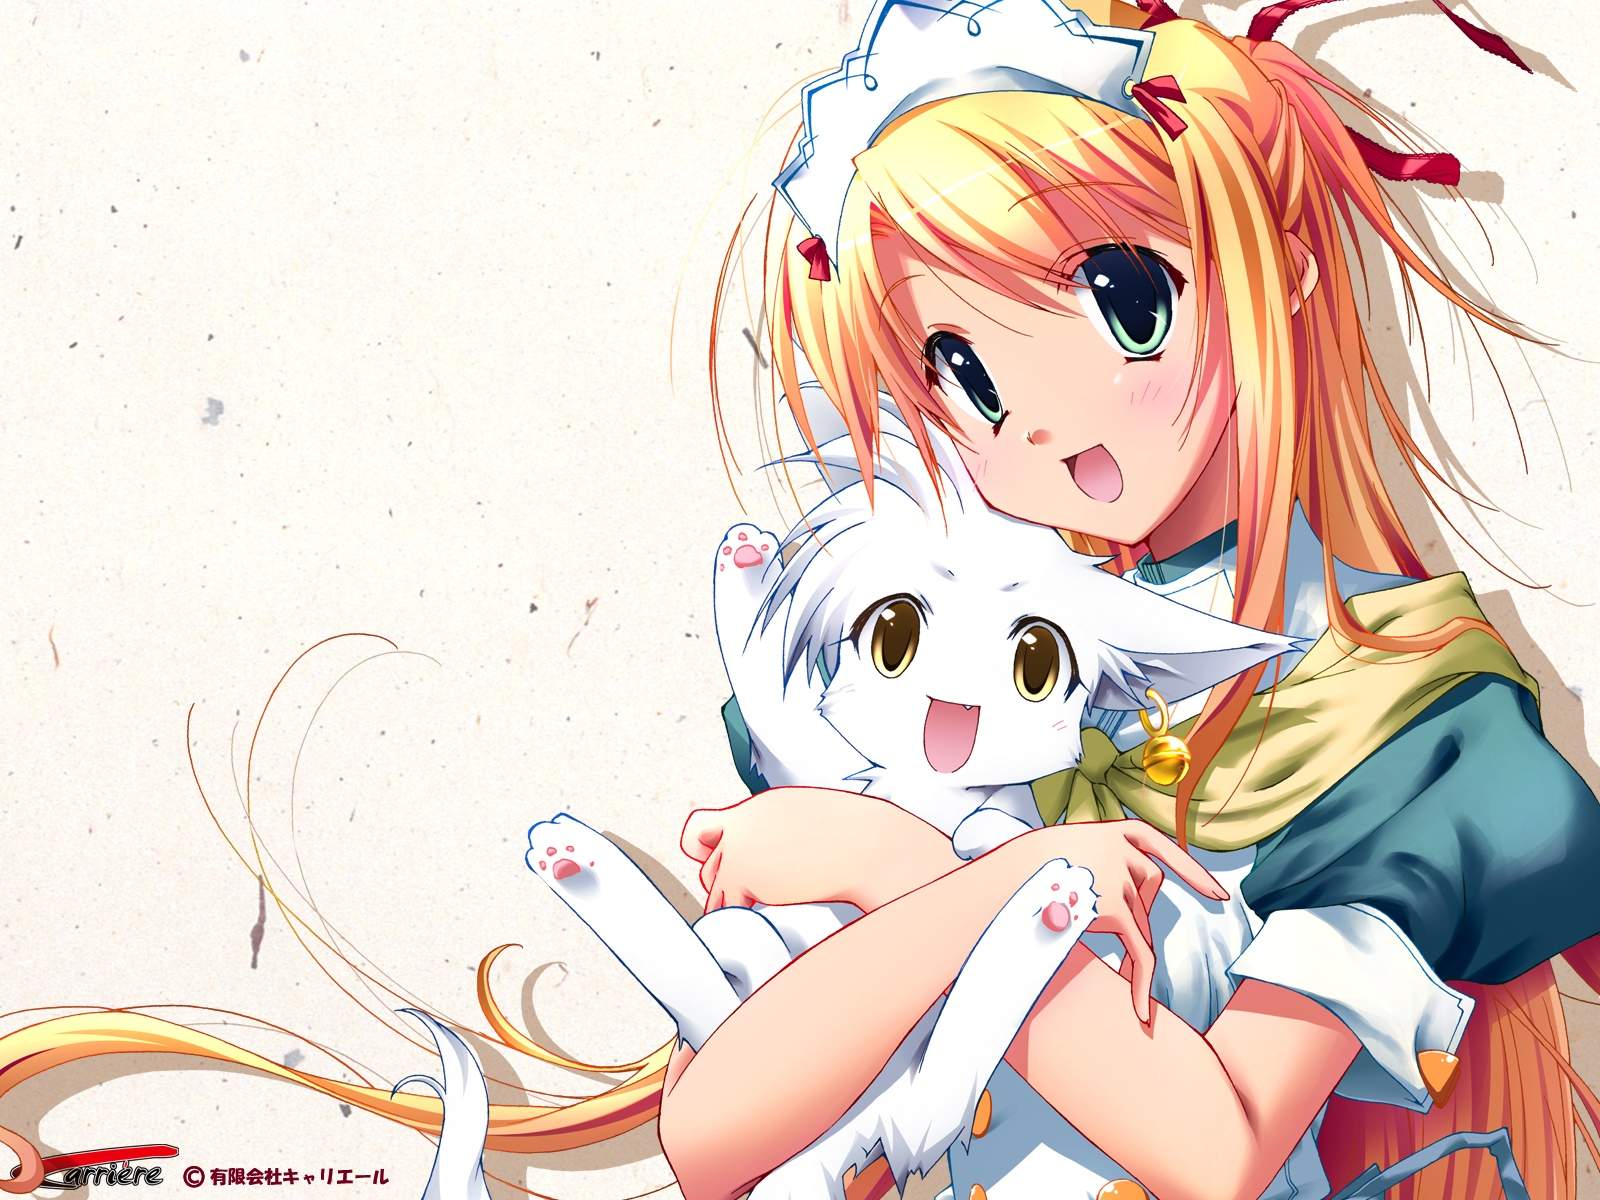 hickey photography: Cute Anime Wallpapers